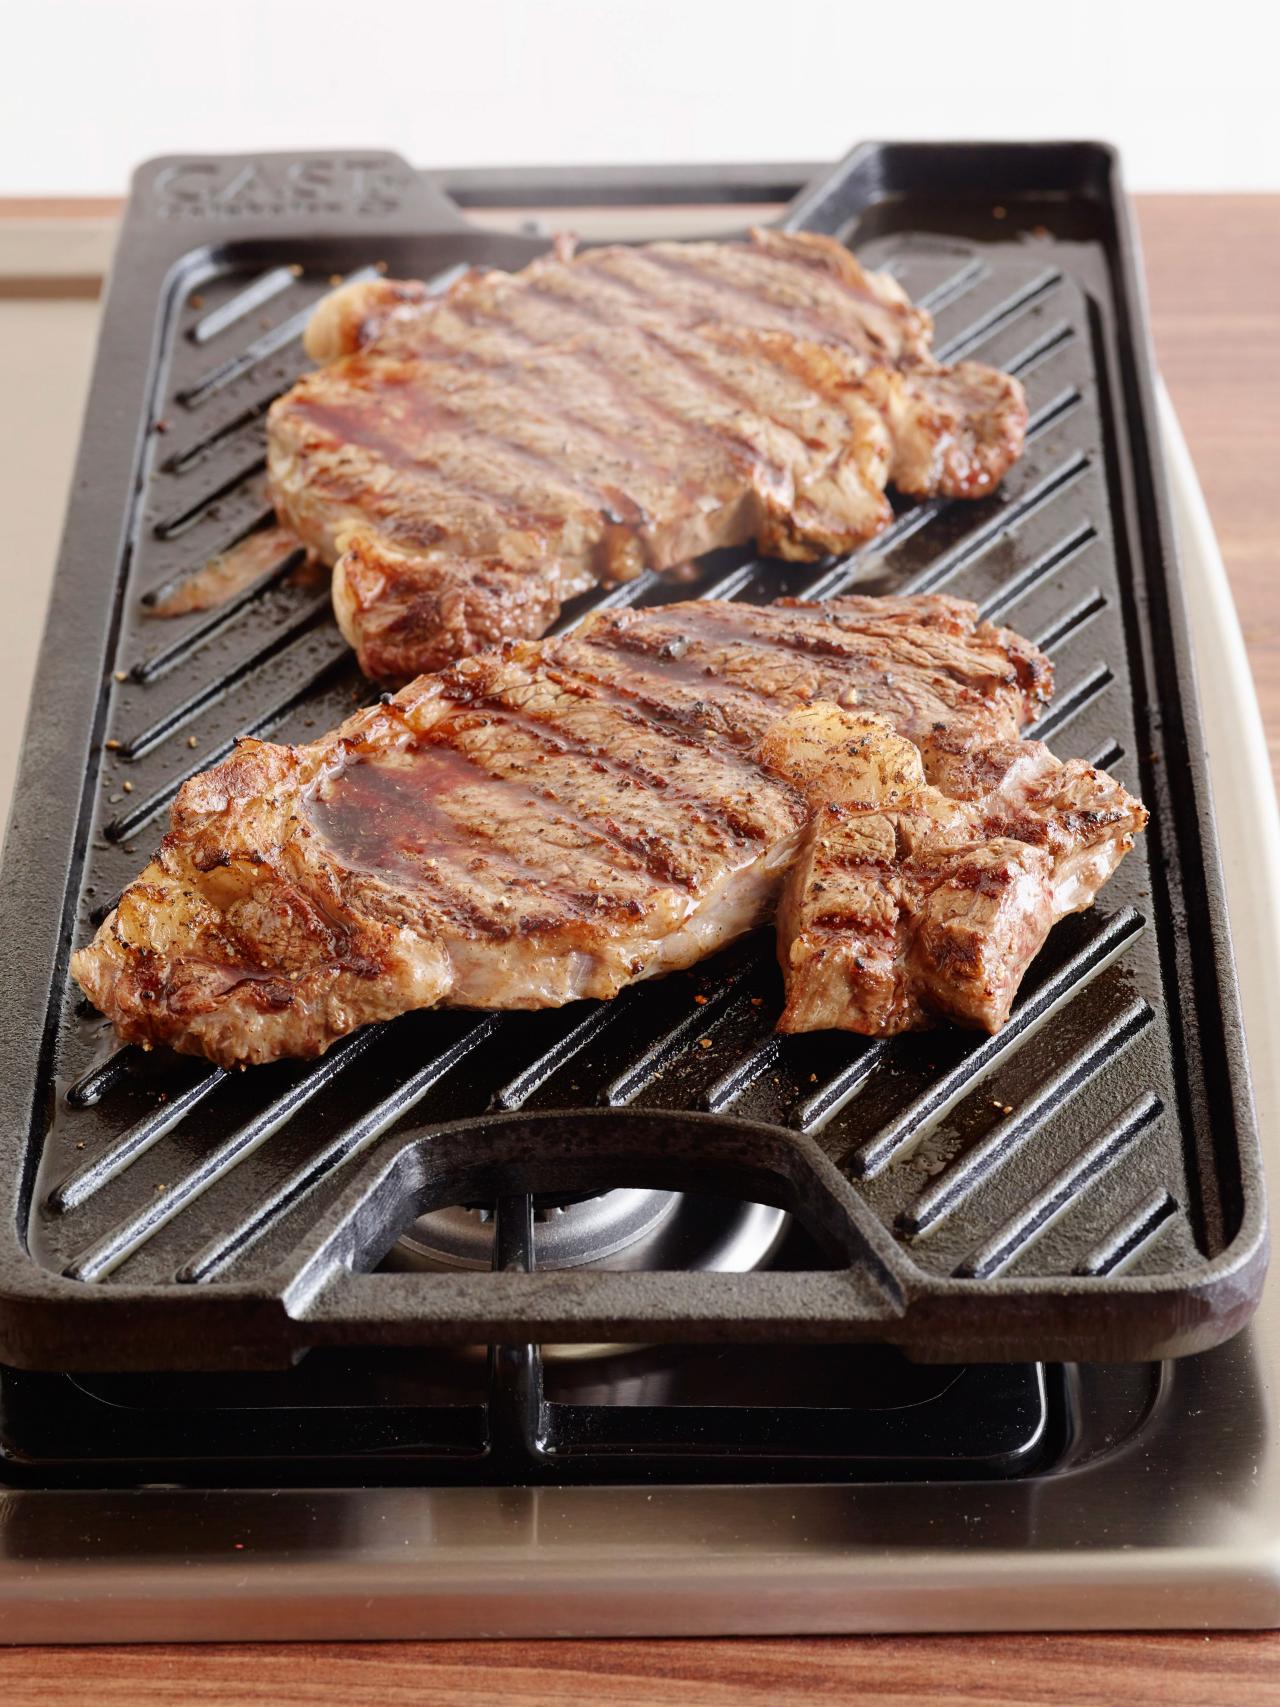 6 Grilled Steak Tools from Walmart, Grilling and Summer How-Tos, Recipes  and Ideas : Food Network